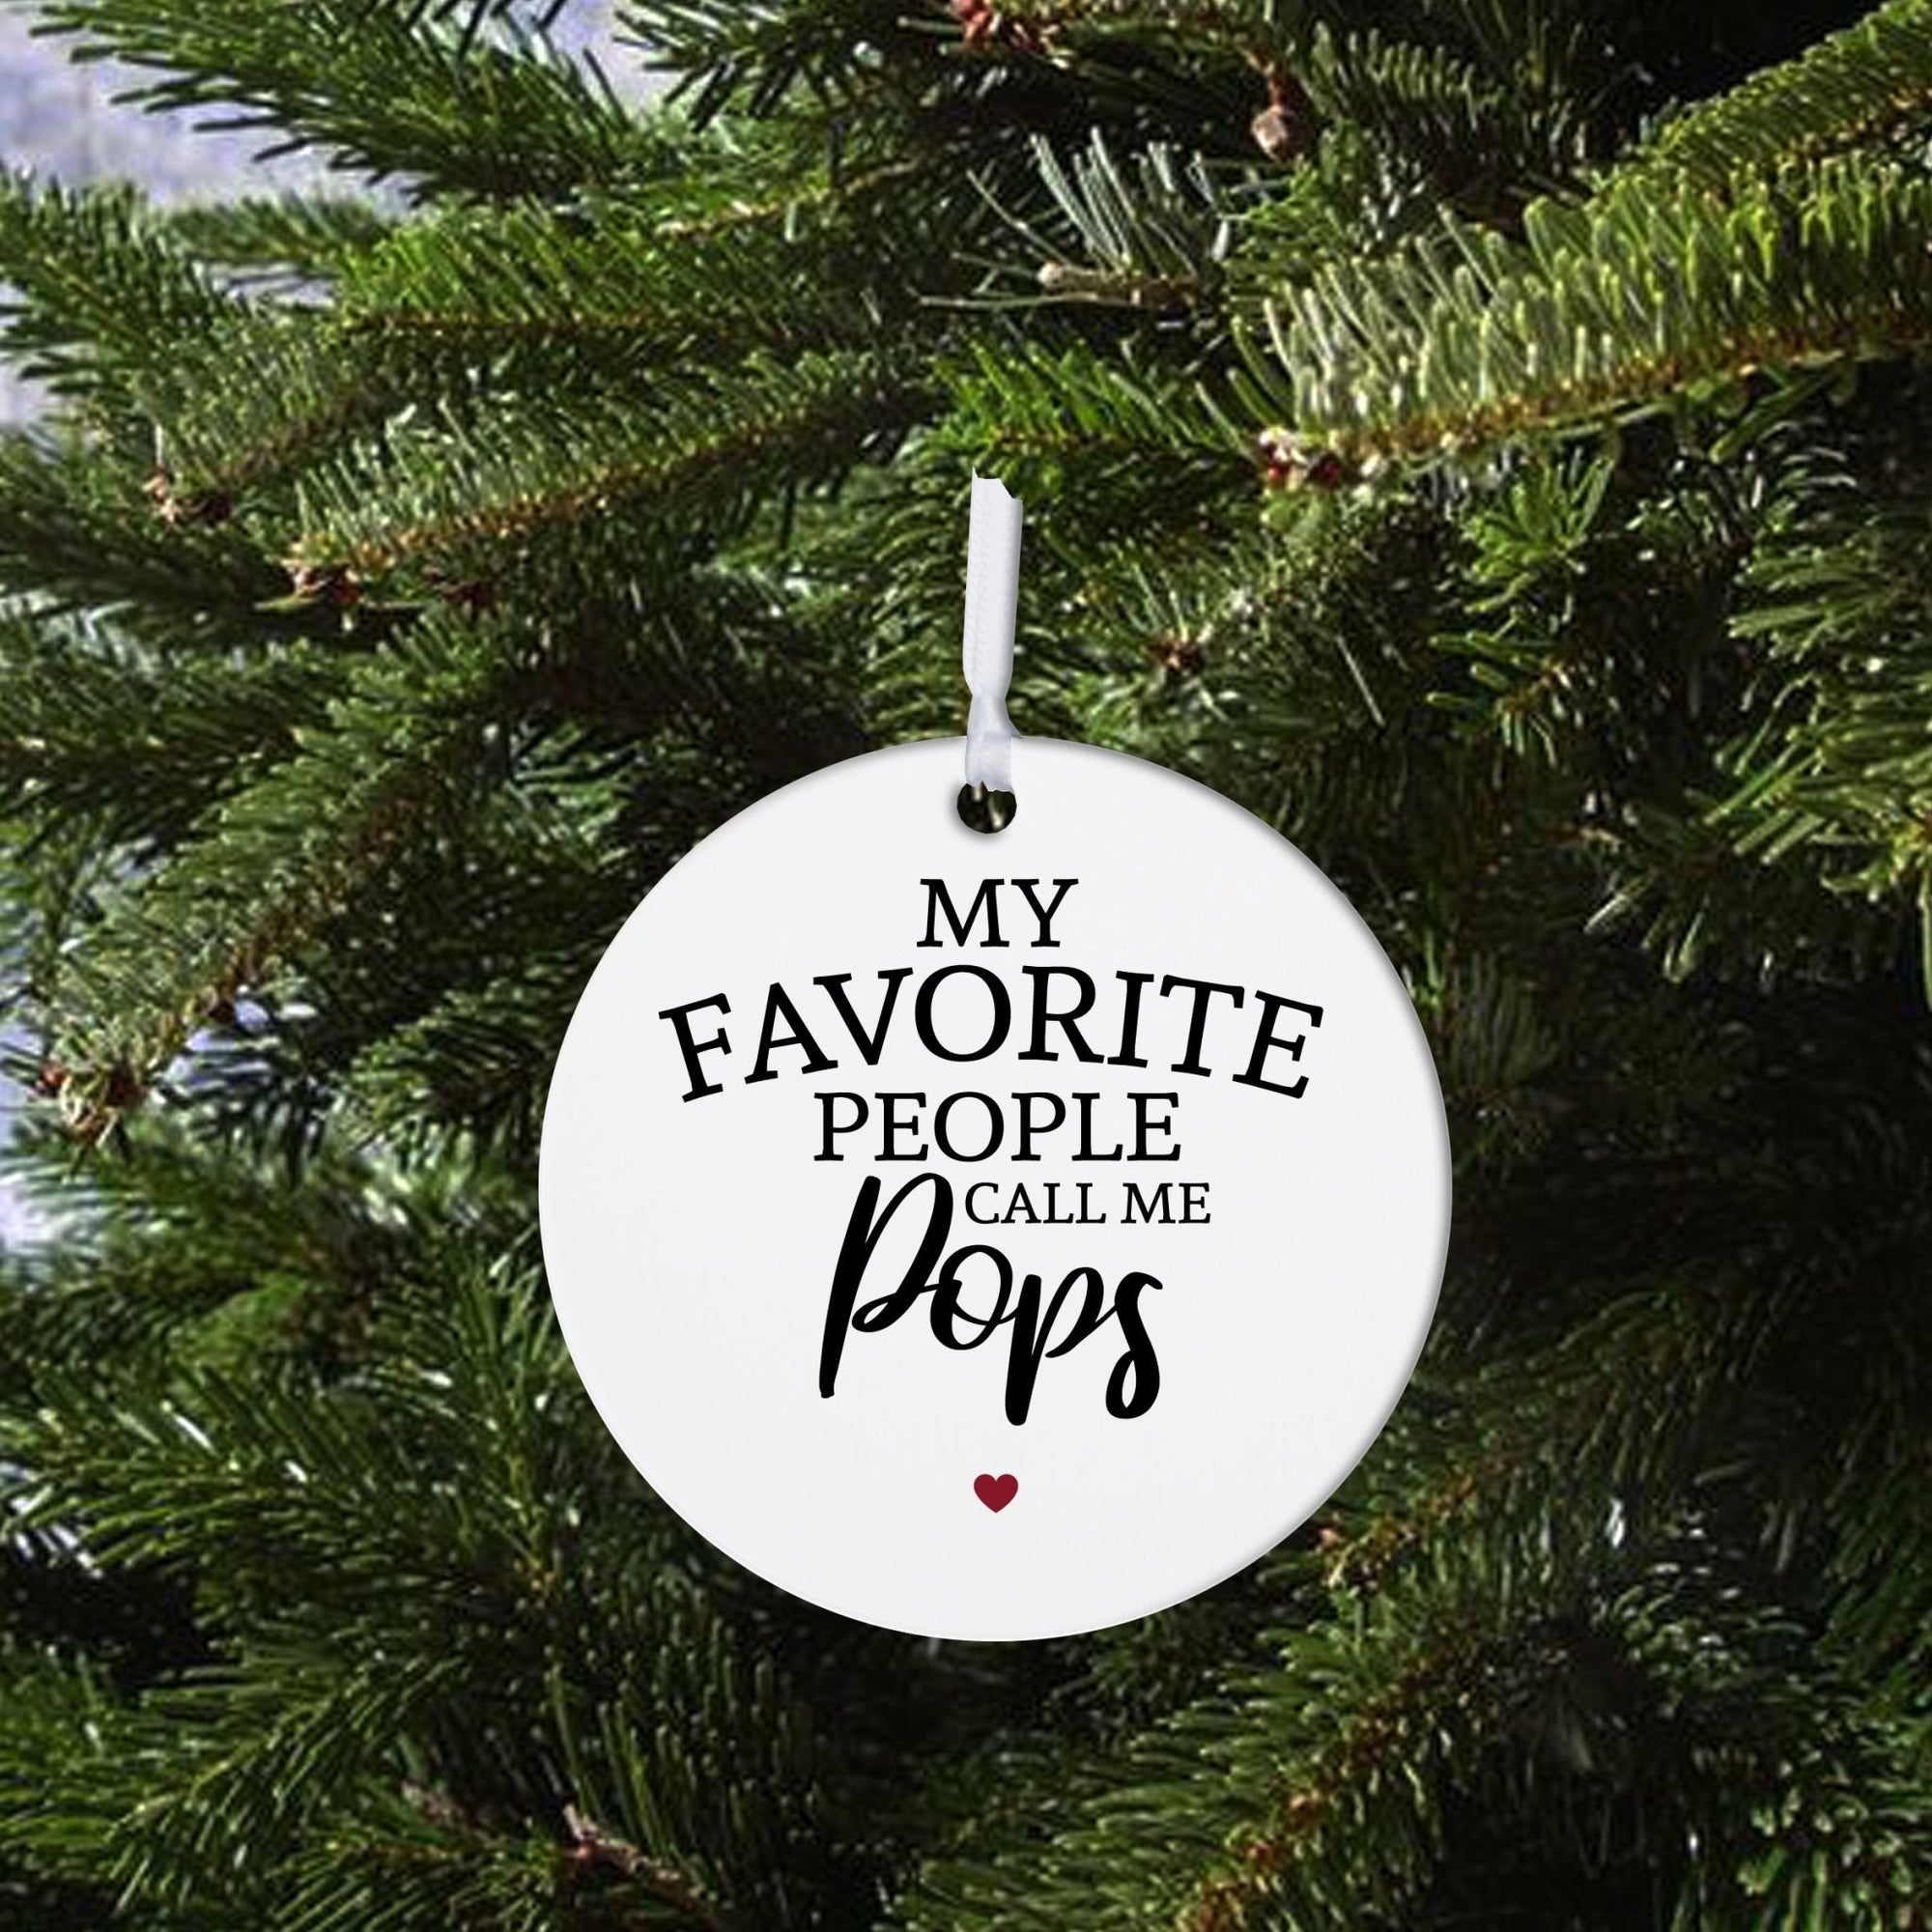 Grandparents White Ornament With Inspirational Message Gift Ideas - My Favorite People Pops - LifeSong Milestones